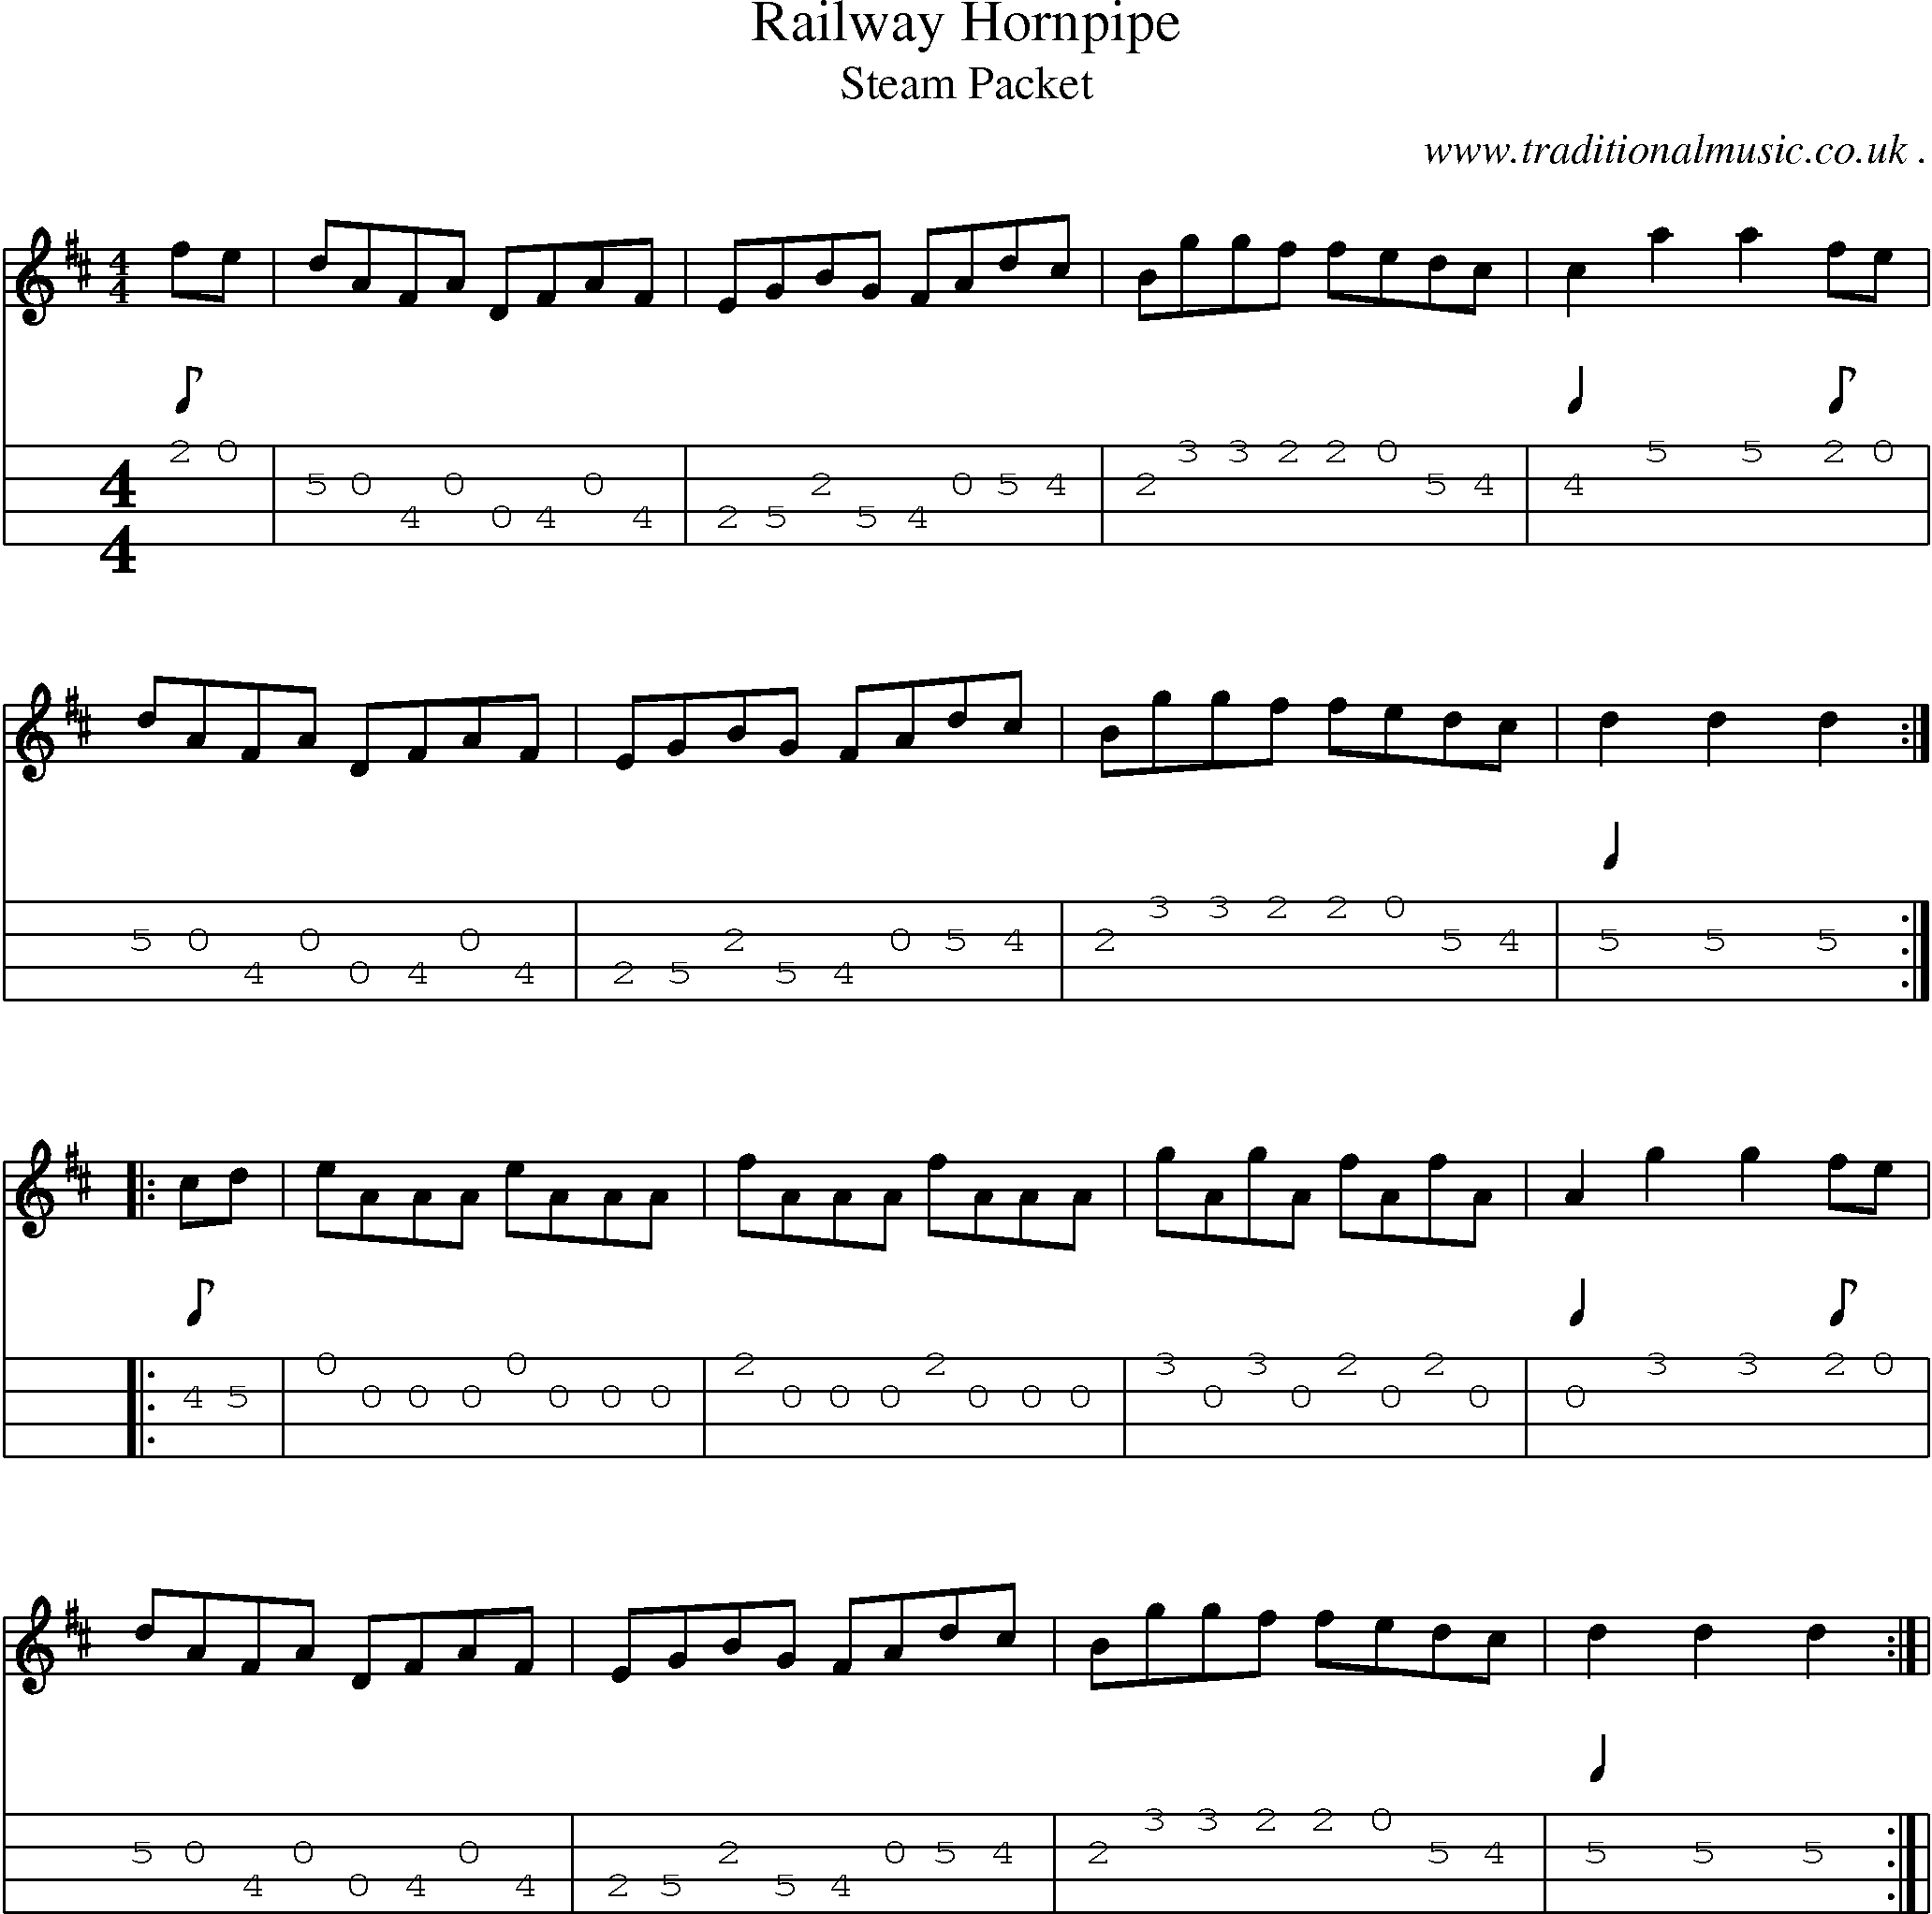 Sheet-Music and Mandolin Tabs for Railway Hornpipe